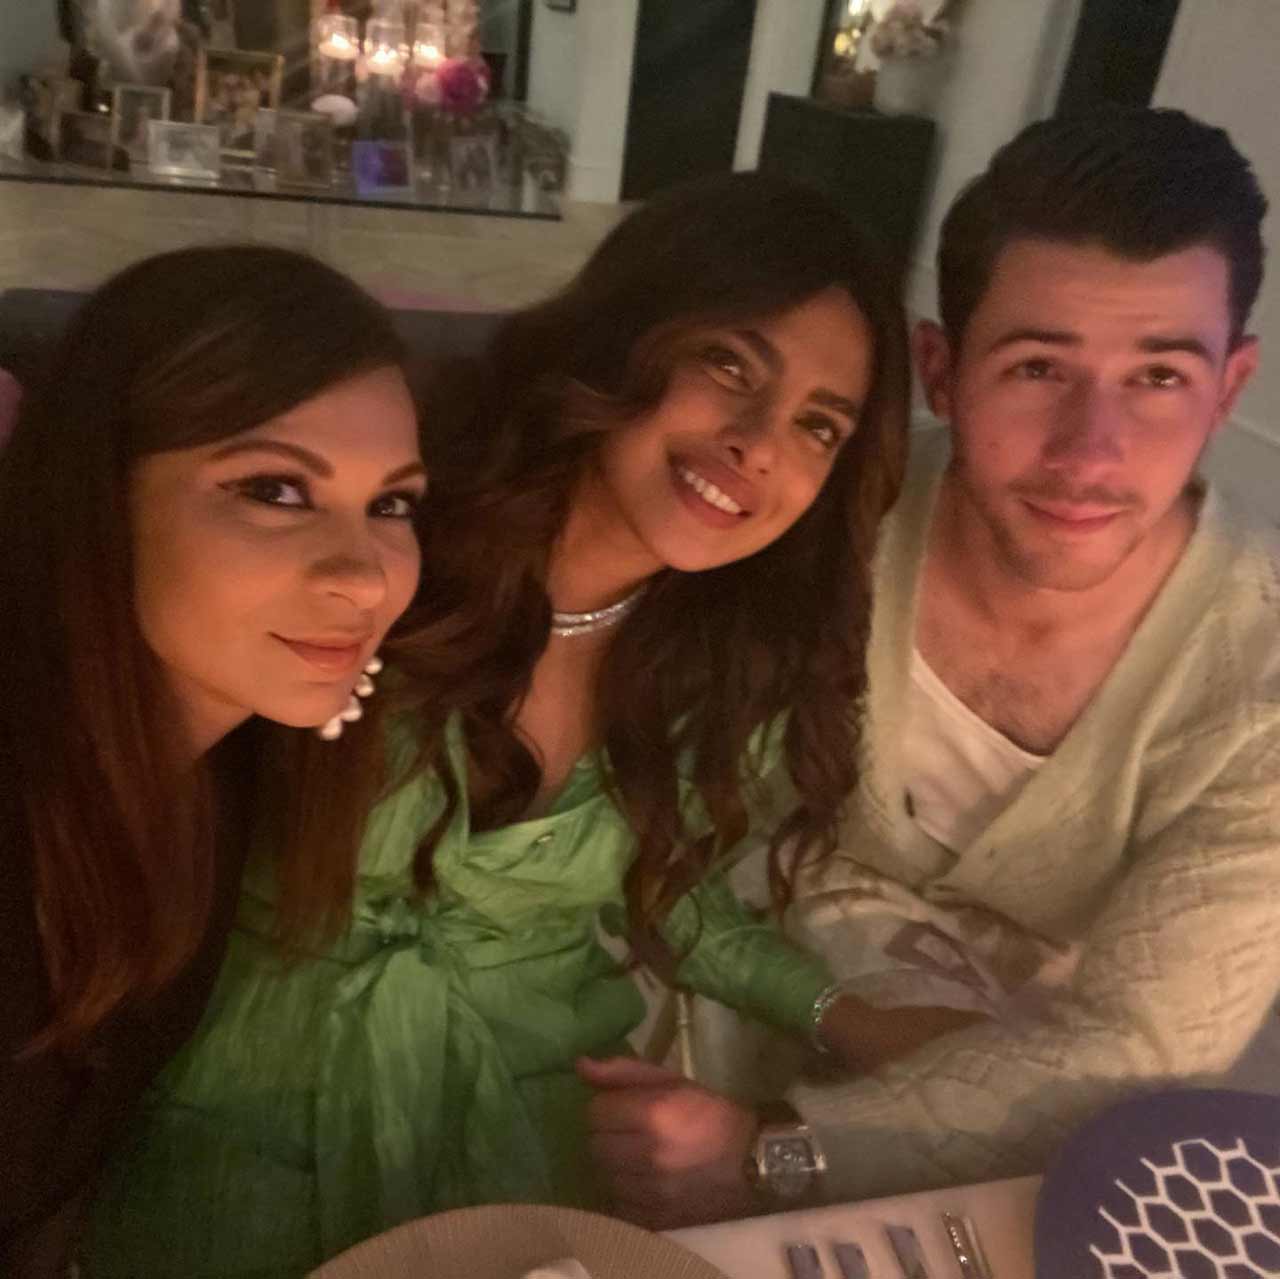 Priyanka Chopra hosted a bash for her manager Anjula Acharia, and the inside pictures show how much fun the girl gang had at the party.